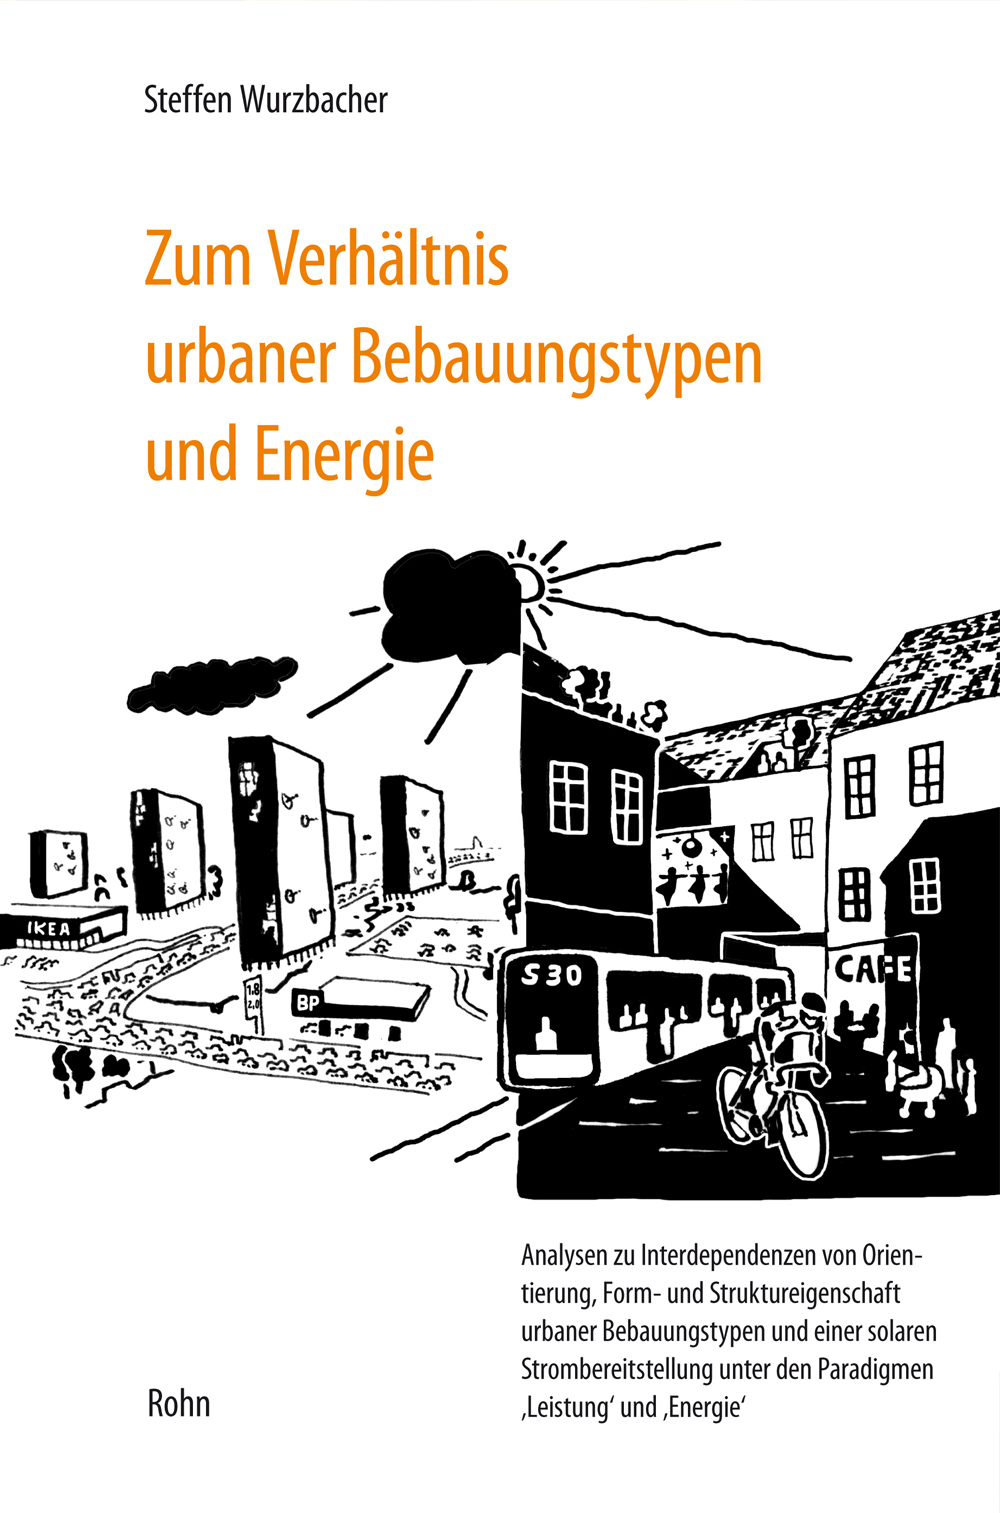 On the relationship between urban development types and energy